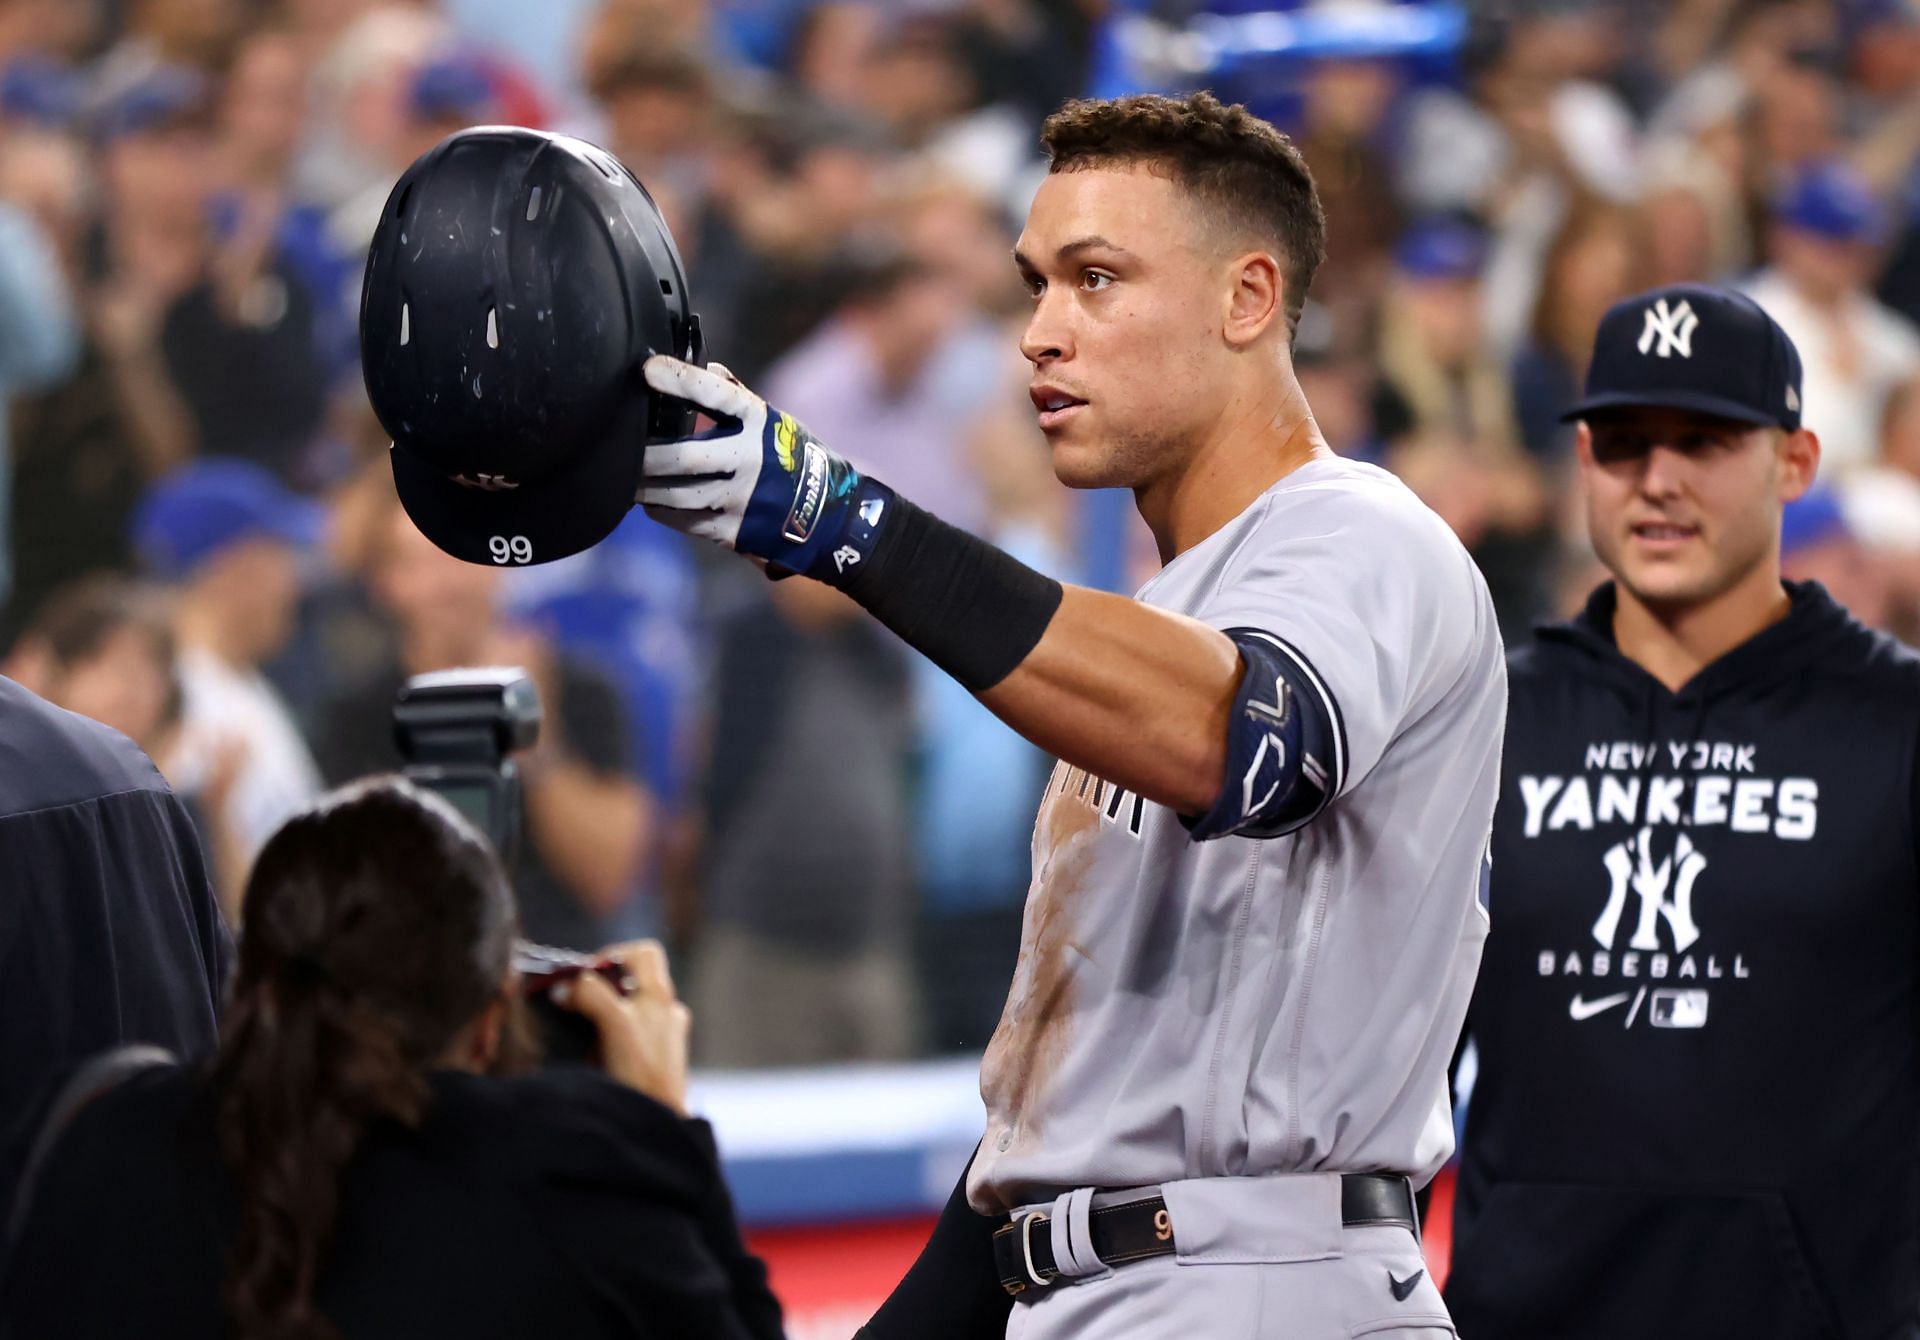 She's been with me through it all - New York Yankees superstar Aaron Judge  ties home run record, pays heartfelt tribute to his mother